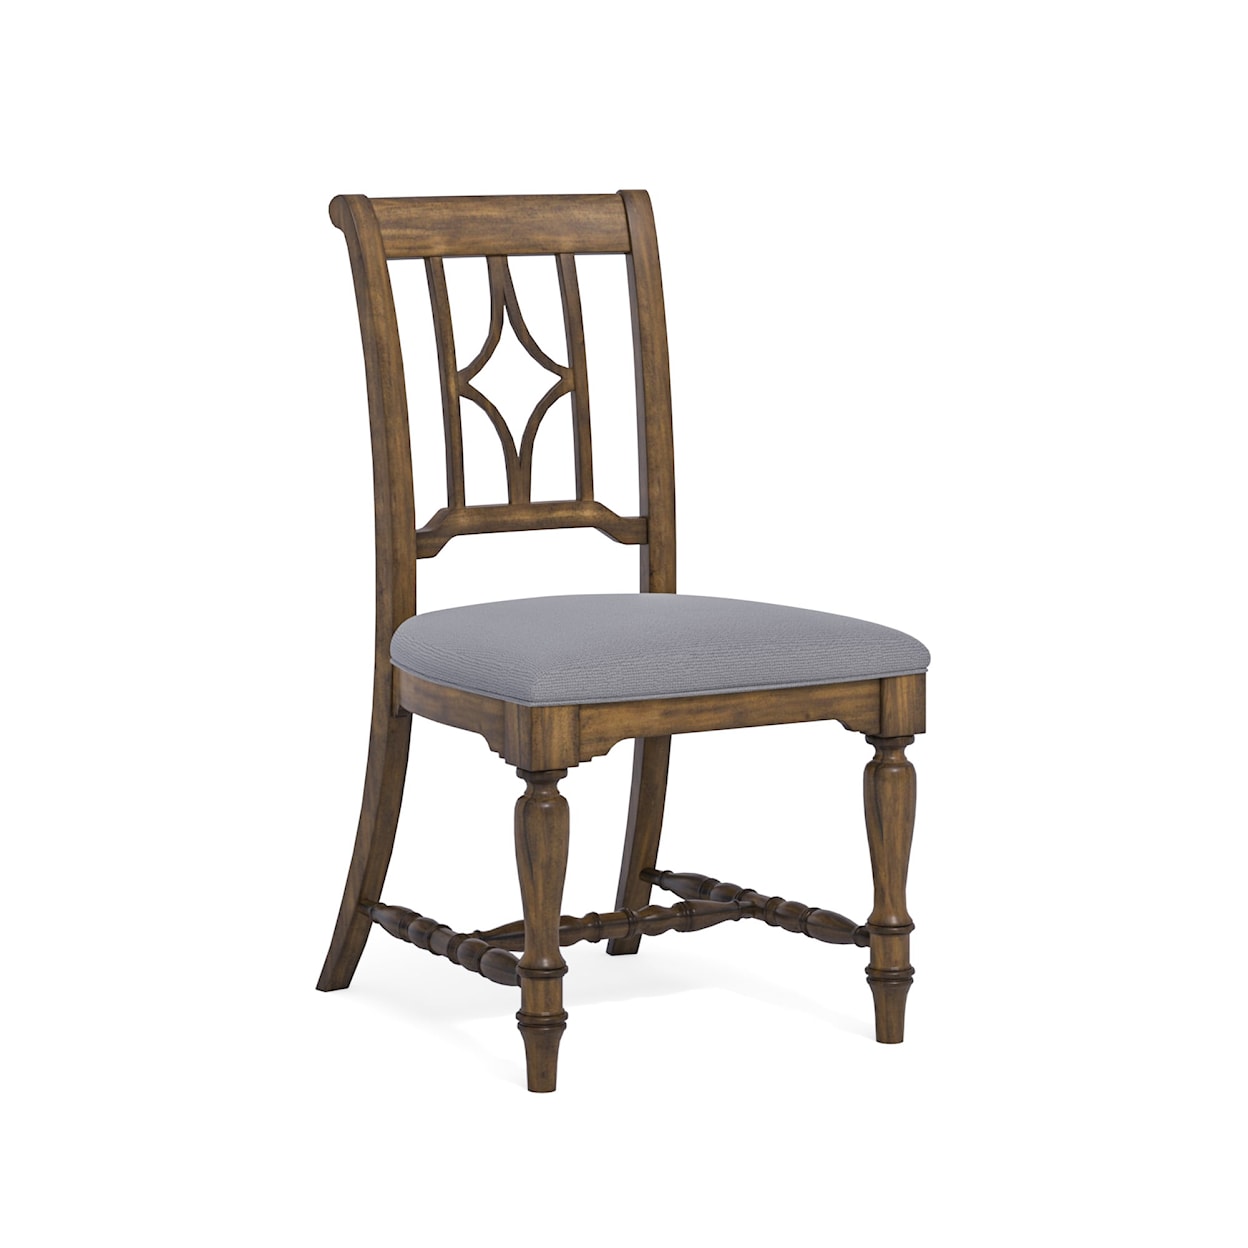 Flexsteel Casegoods Plymouth Dining Side Chair